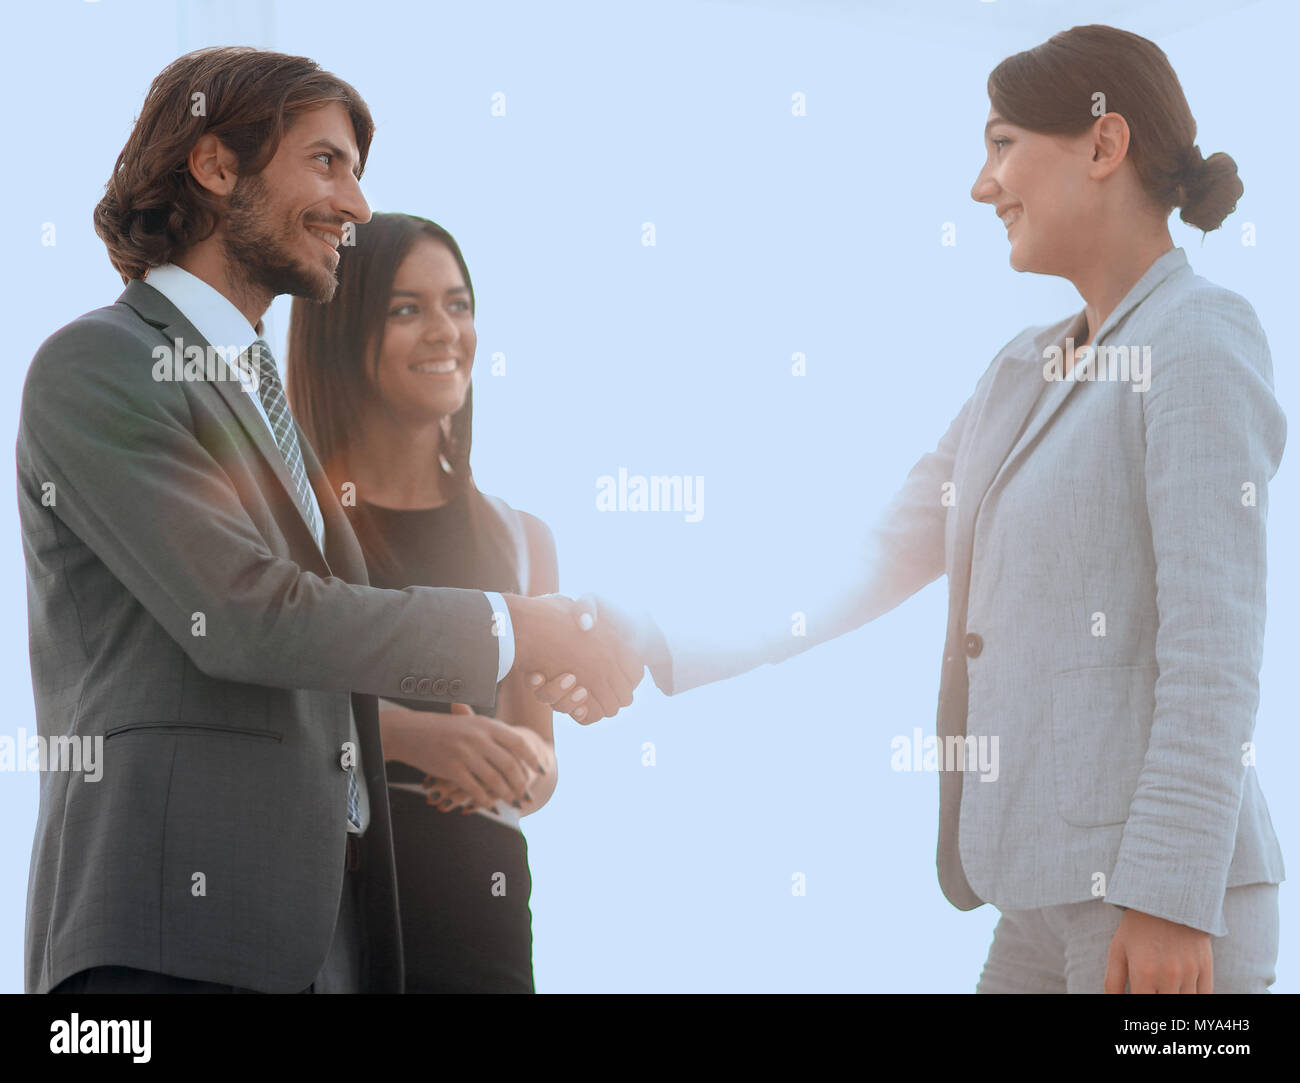 Handshake Women Images – Browse 200,494 Stock Photos, Vectors, and